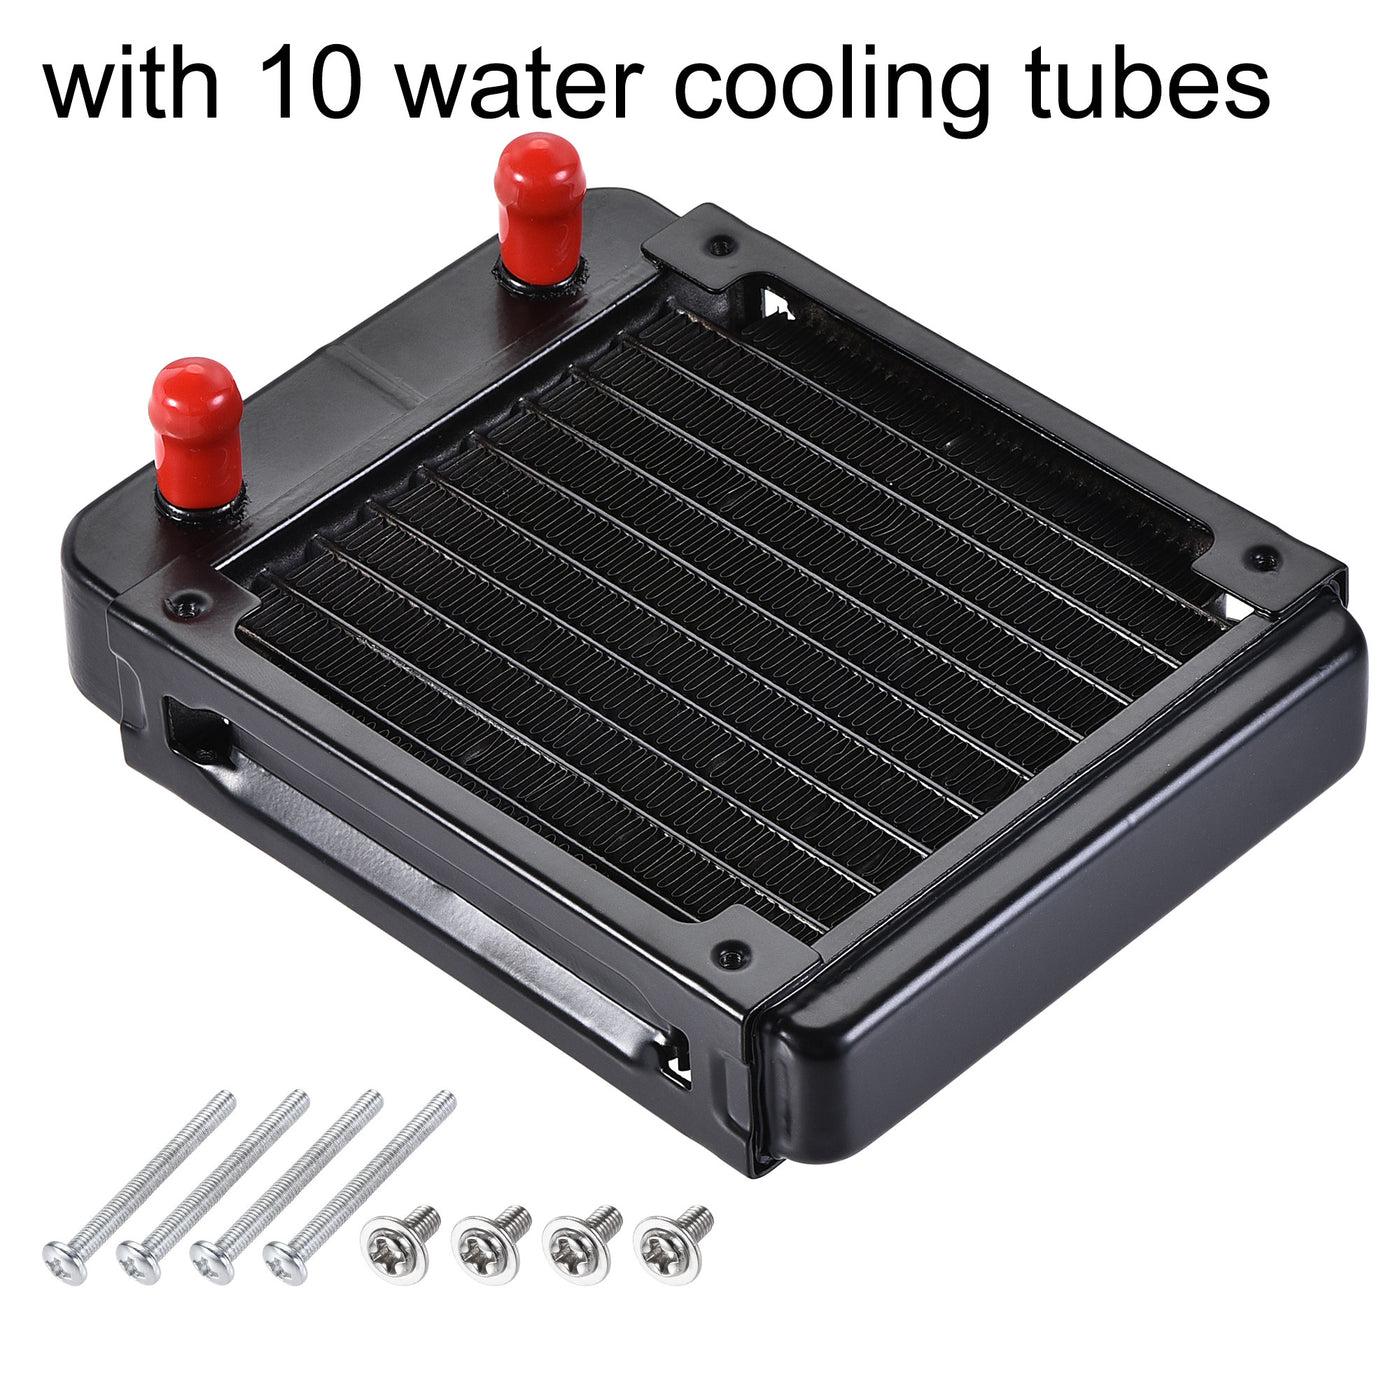 uxcell Uxcell Water Cooling Radiator for PC CPU 155mm Long 9.5mm Nozzle with 10 Aluminum Tubes